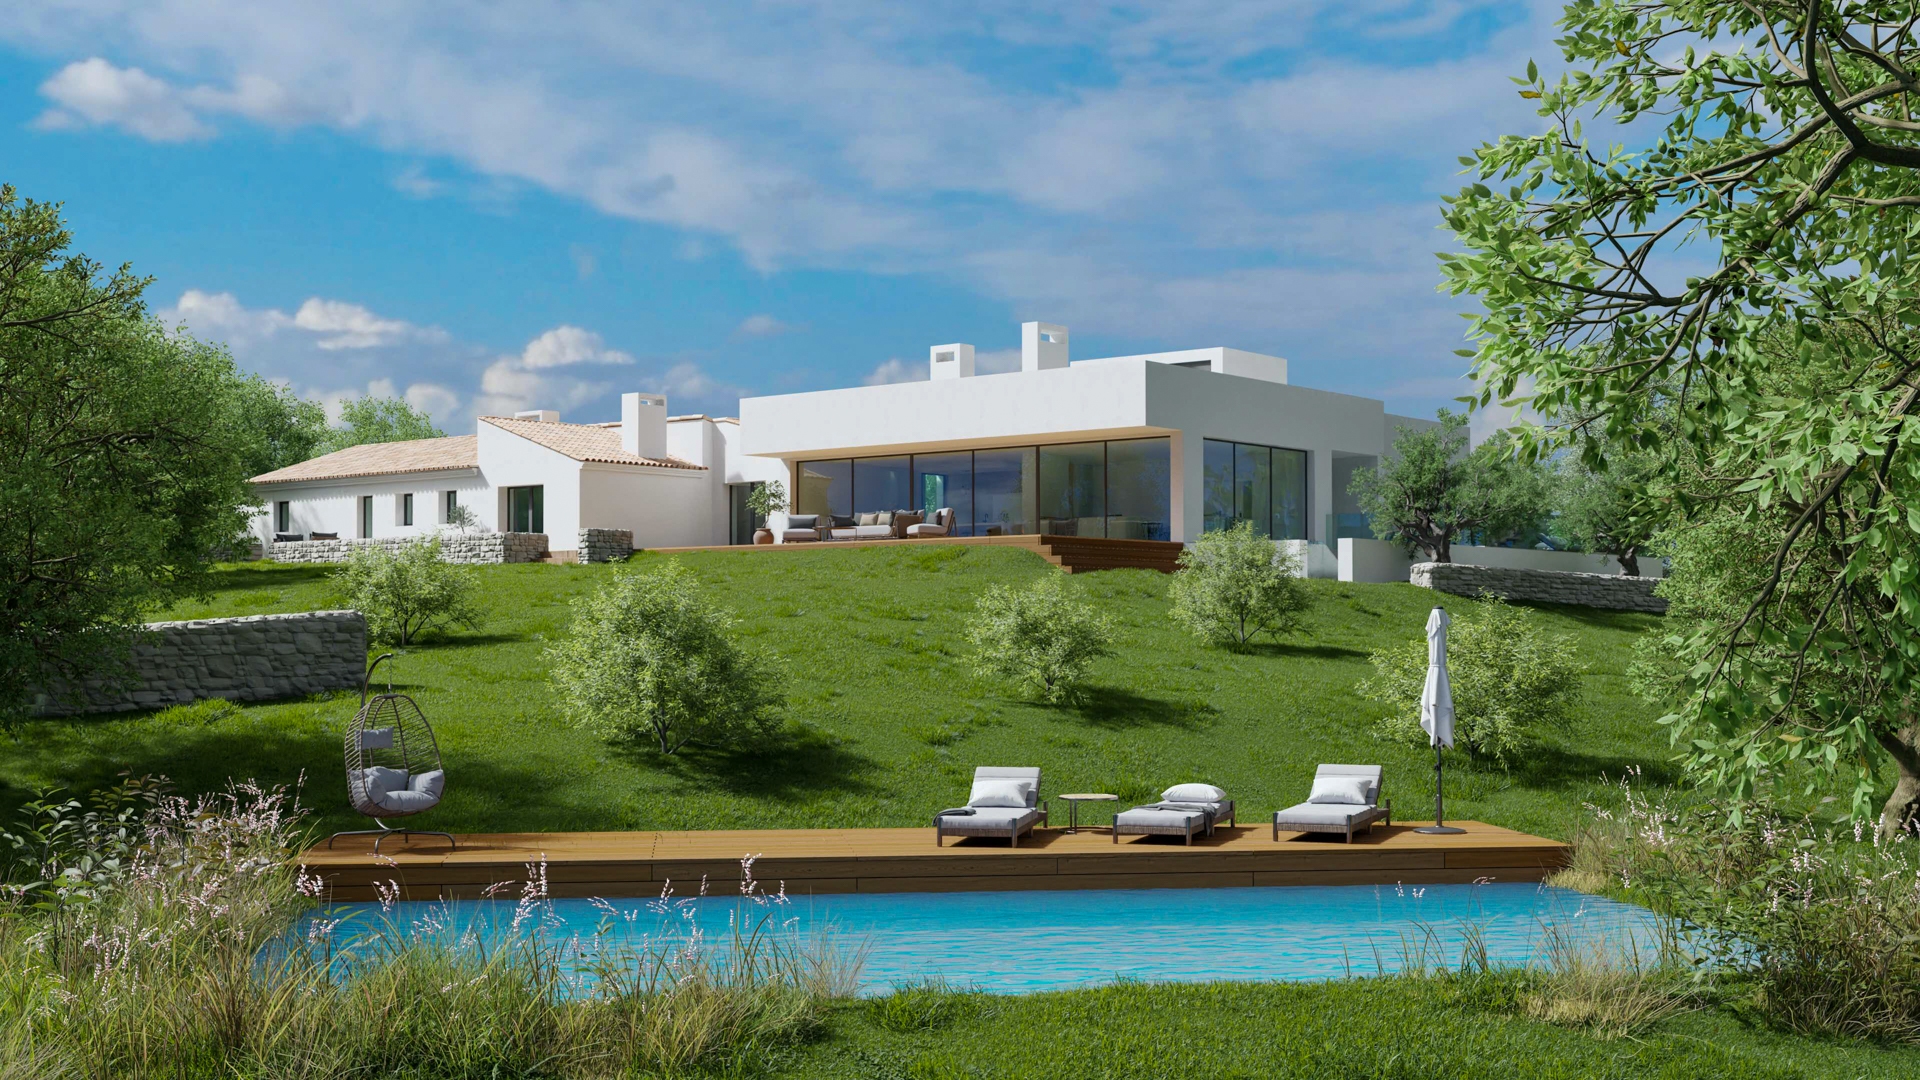 Picturesque Plot of Land with Approved Project for Construction of 2 houses, Santa Catarina, East Algarve | TV2046 Large plot for the construction of a villa and an additional linked villa for guest accommodation, in Santa Catarina, near Tavira.